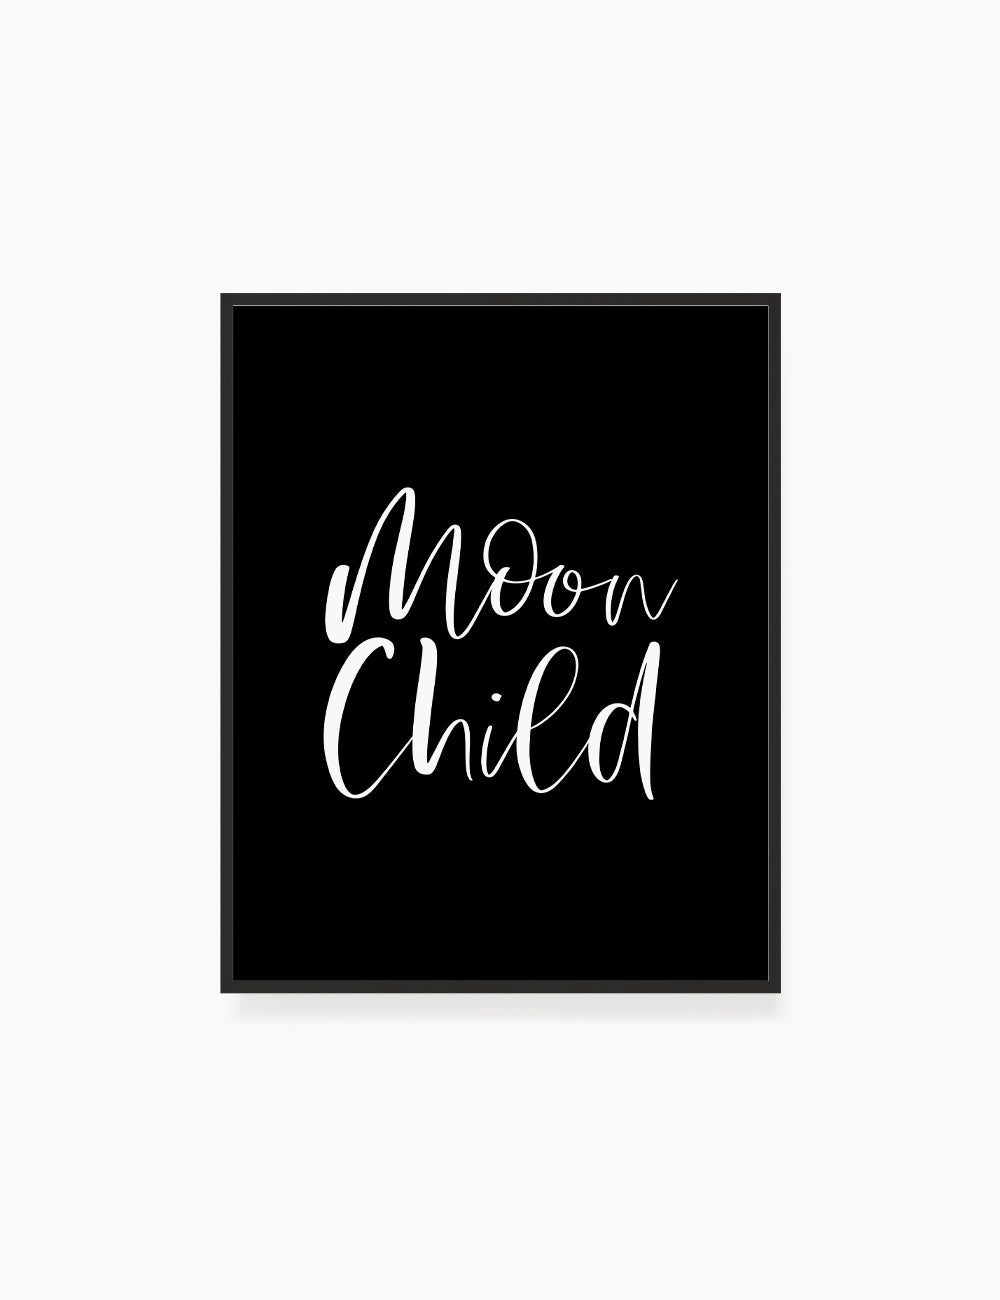 Printable Wall Art Quote: MOON CHILD. Printable Poster. Boho Quote. Astrology Quote. - Paper Moon Art & Design